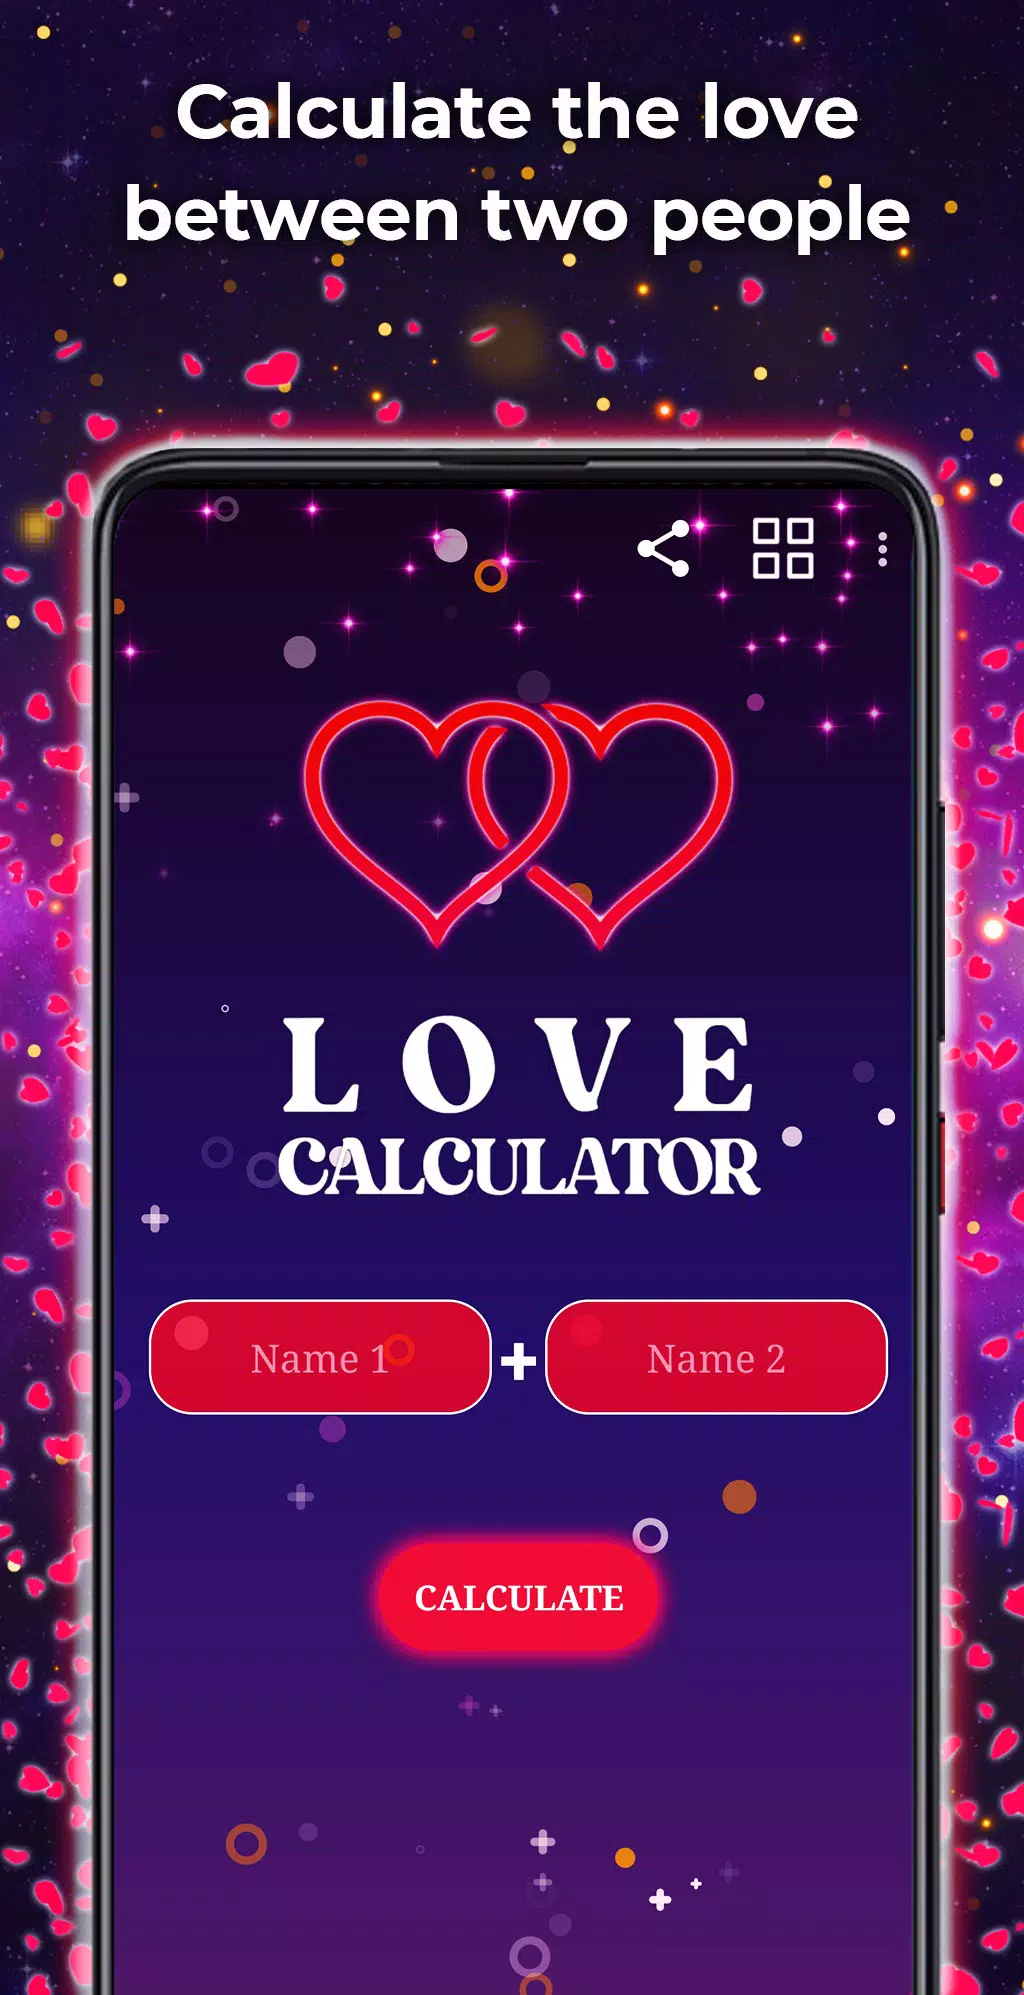 The app is called Love tester btw.